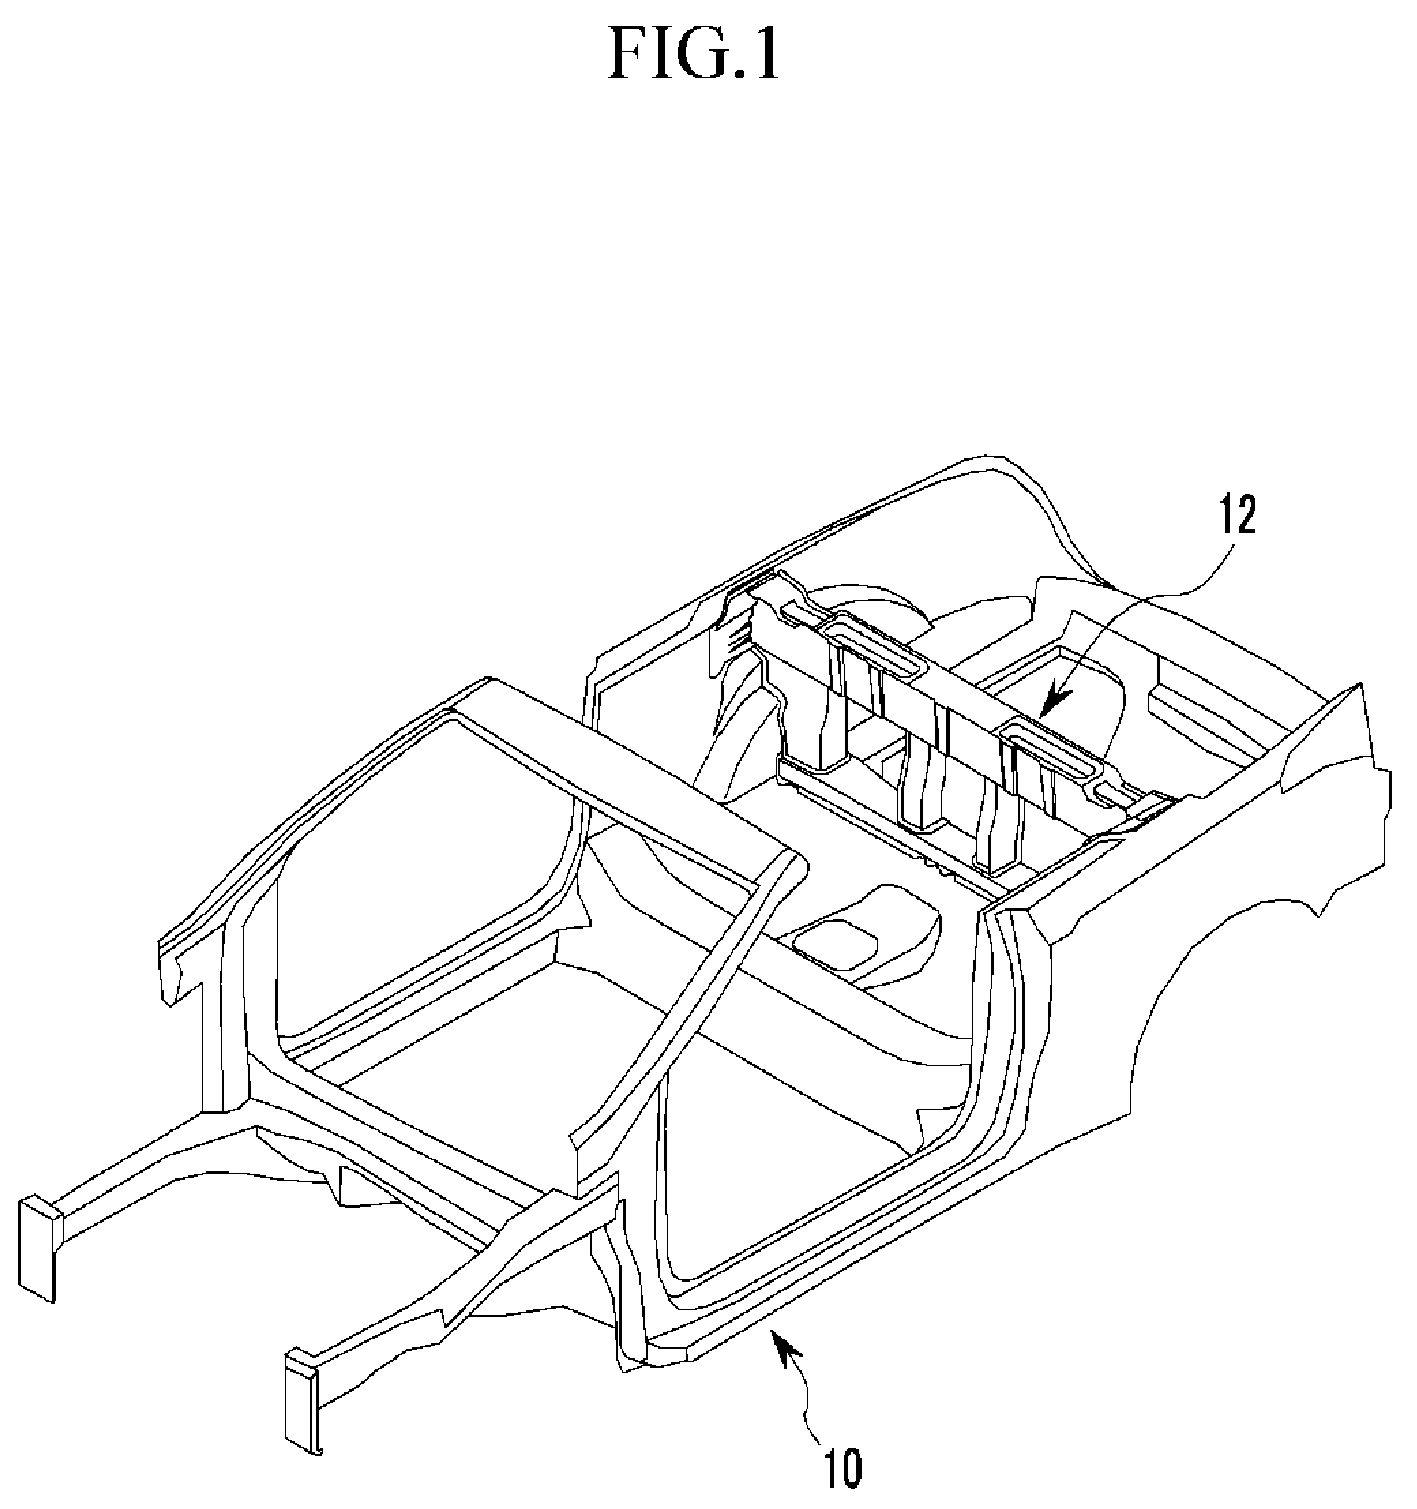 Baffle structure of open car